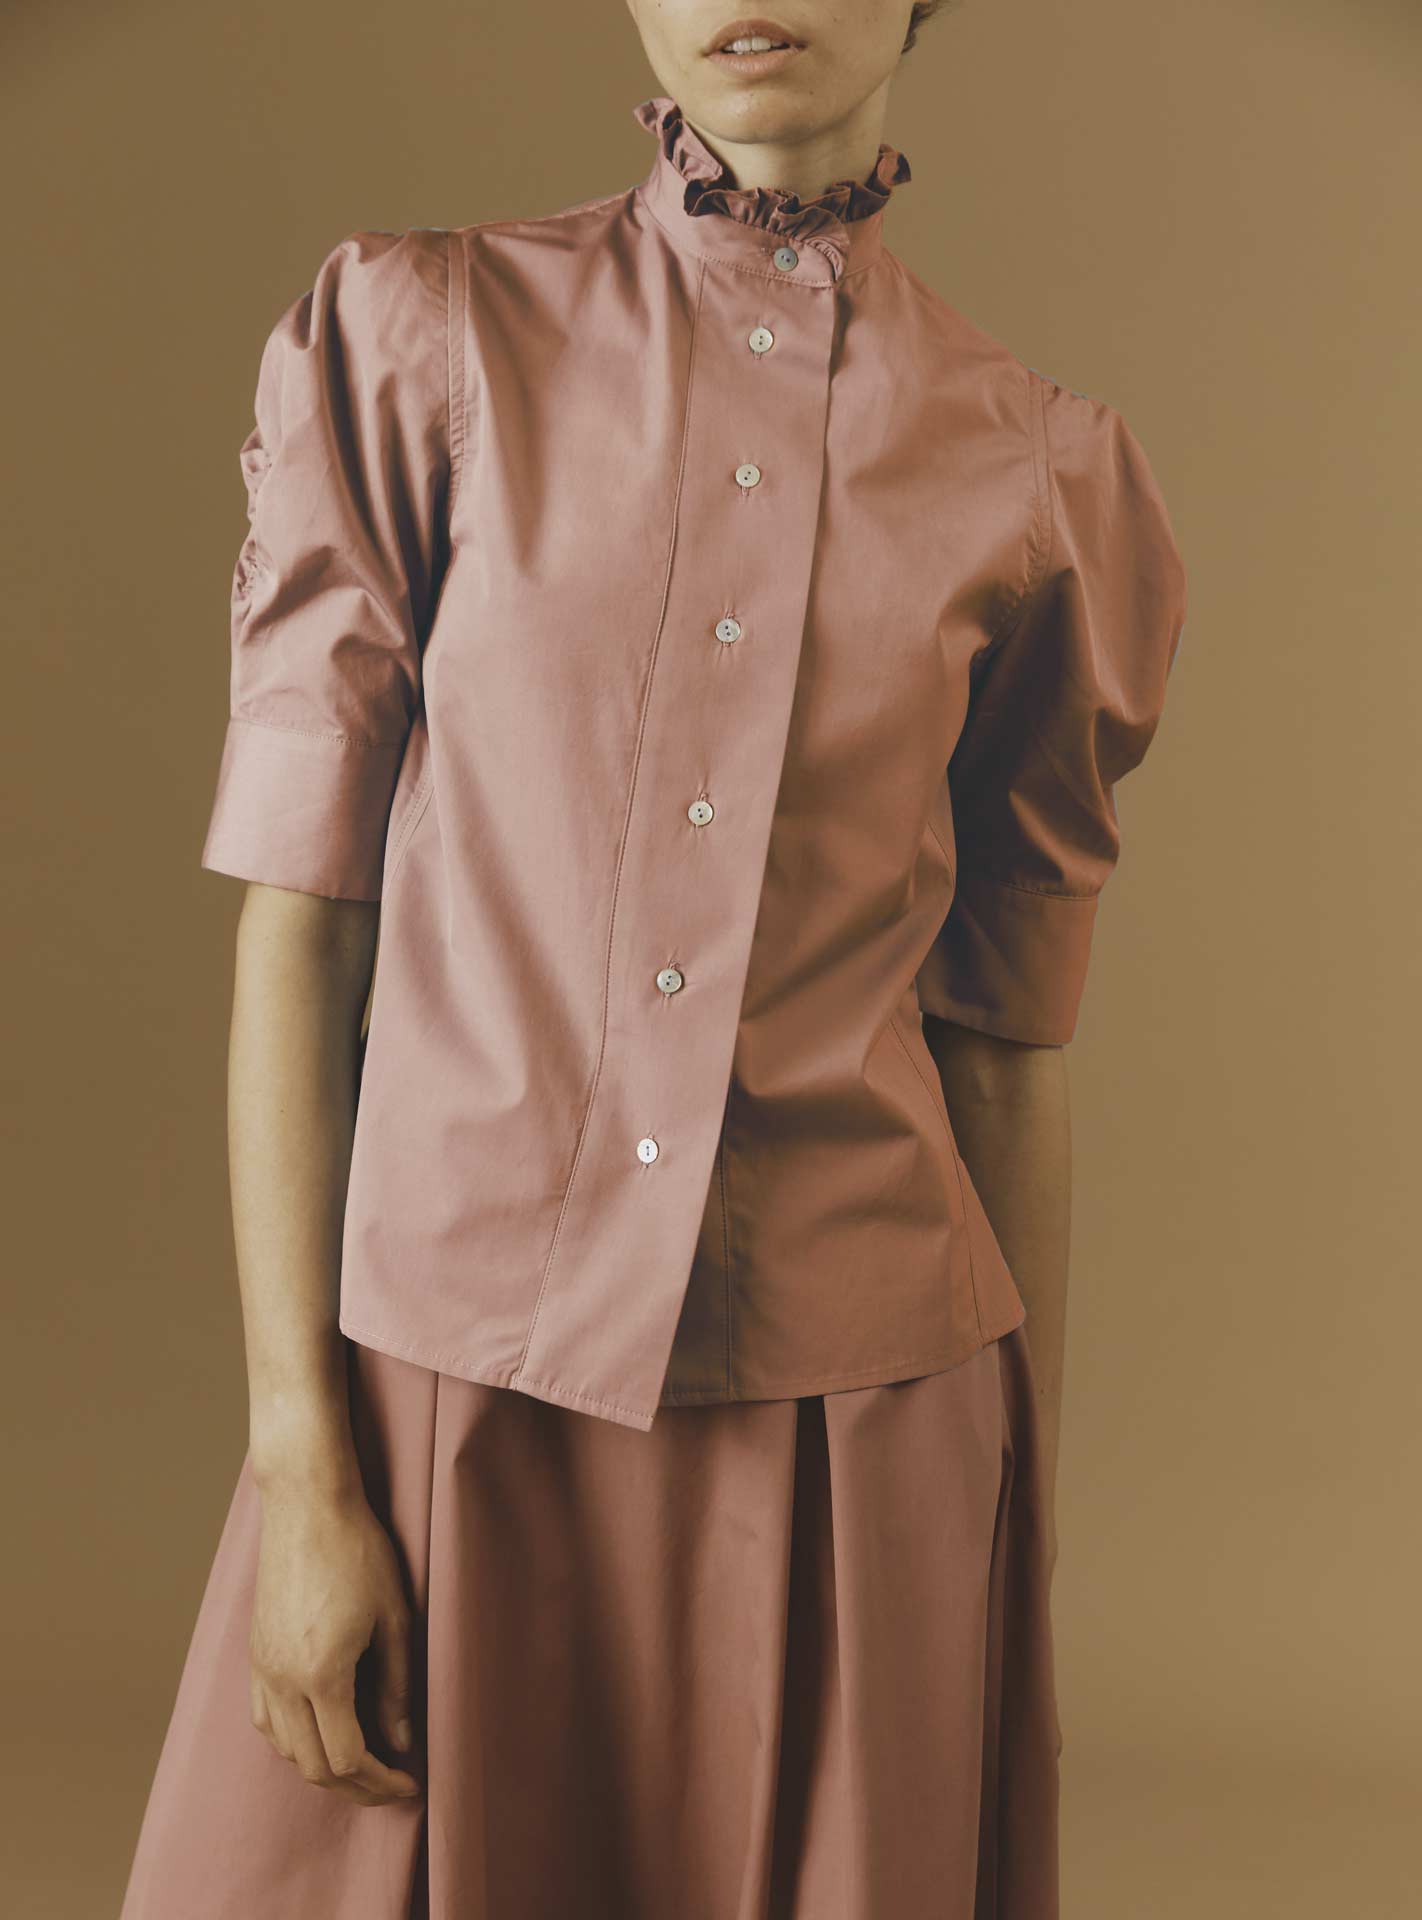 Vita luxury cotton rosewood Blouse by Thierry Colson